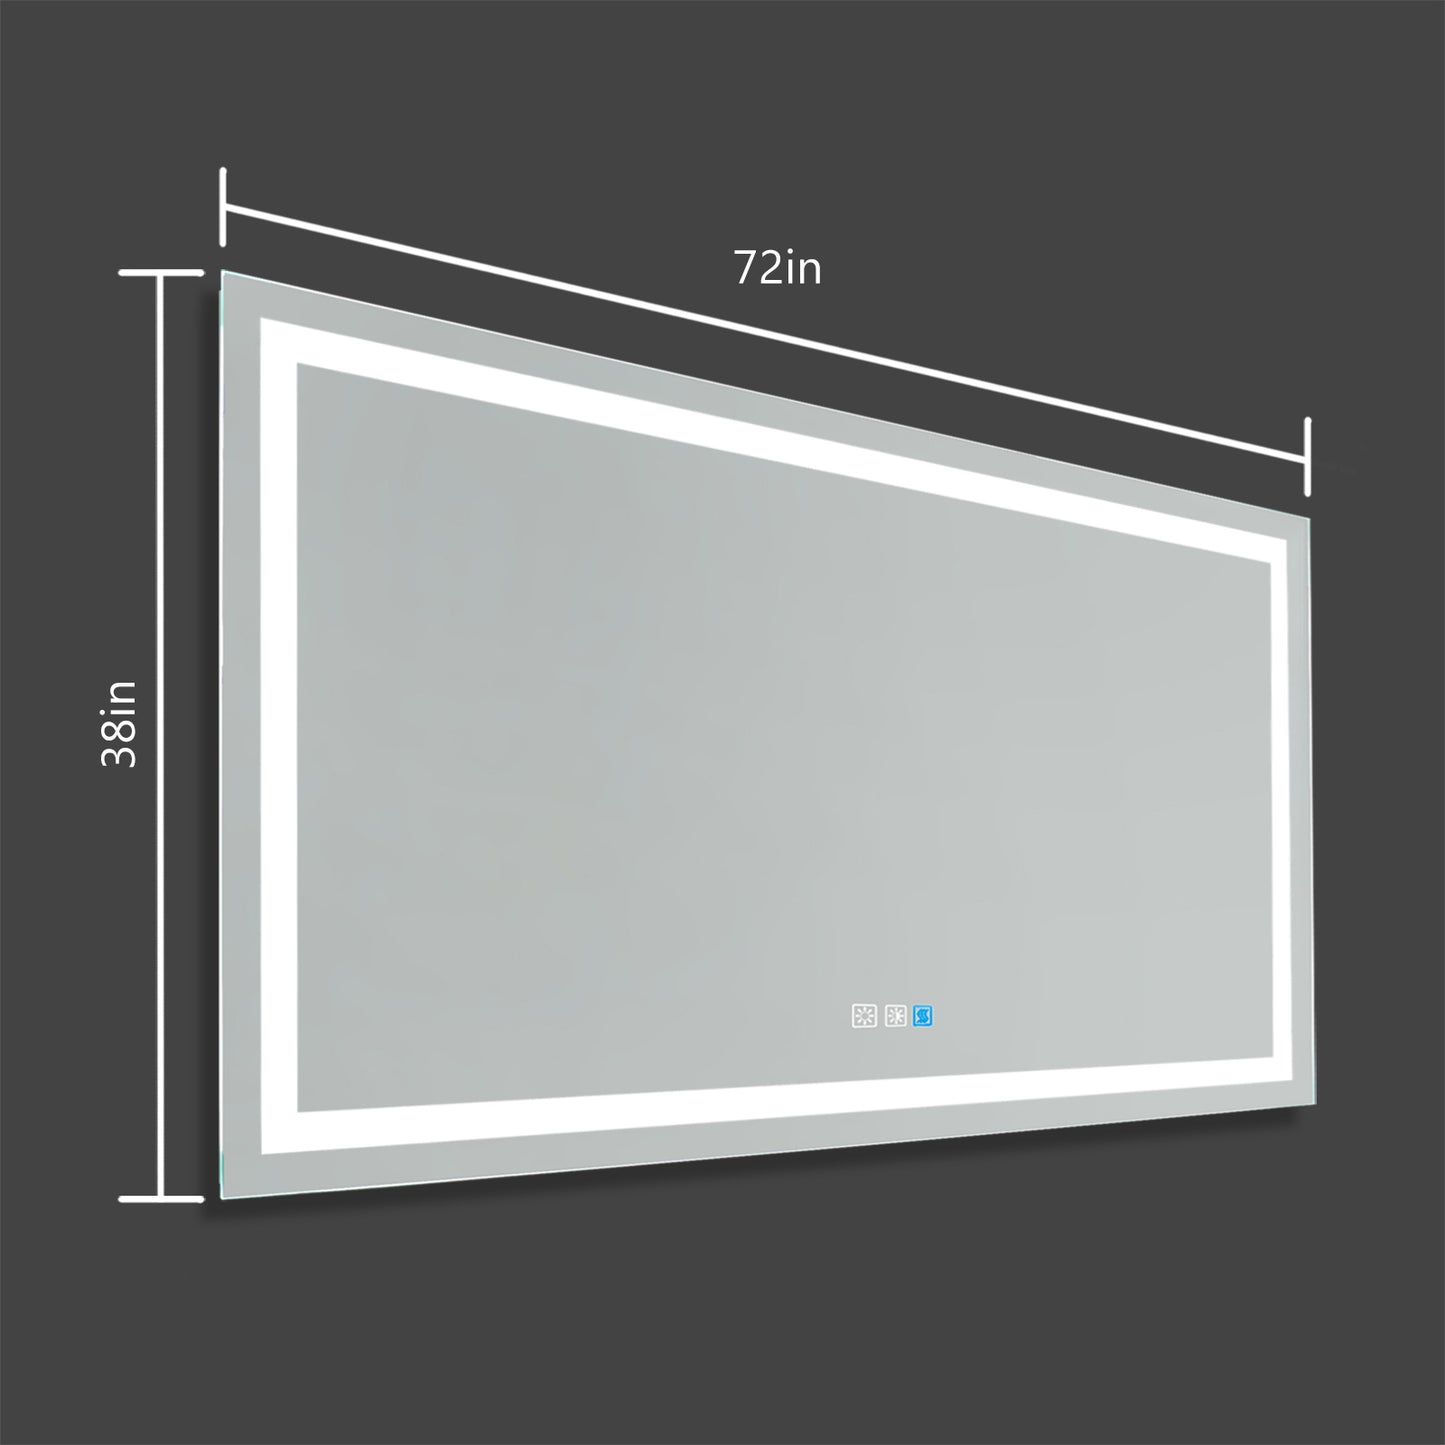 LED Bathroom Mirror, 72 x 38 inch, Anti Fog,Time,Thermometer,Not Dimmable,Color Temper 3000K-6400K,90+ CRI, Waterproof IP44,Horizontal Wall Mounted Way Only